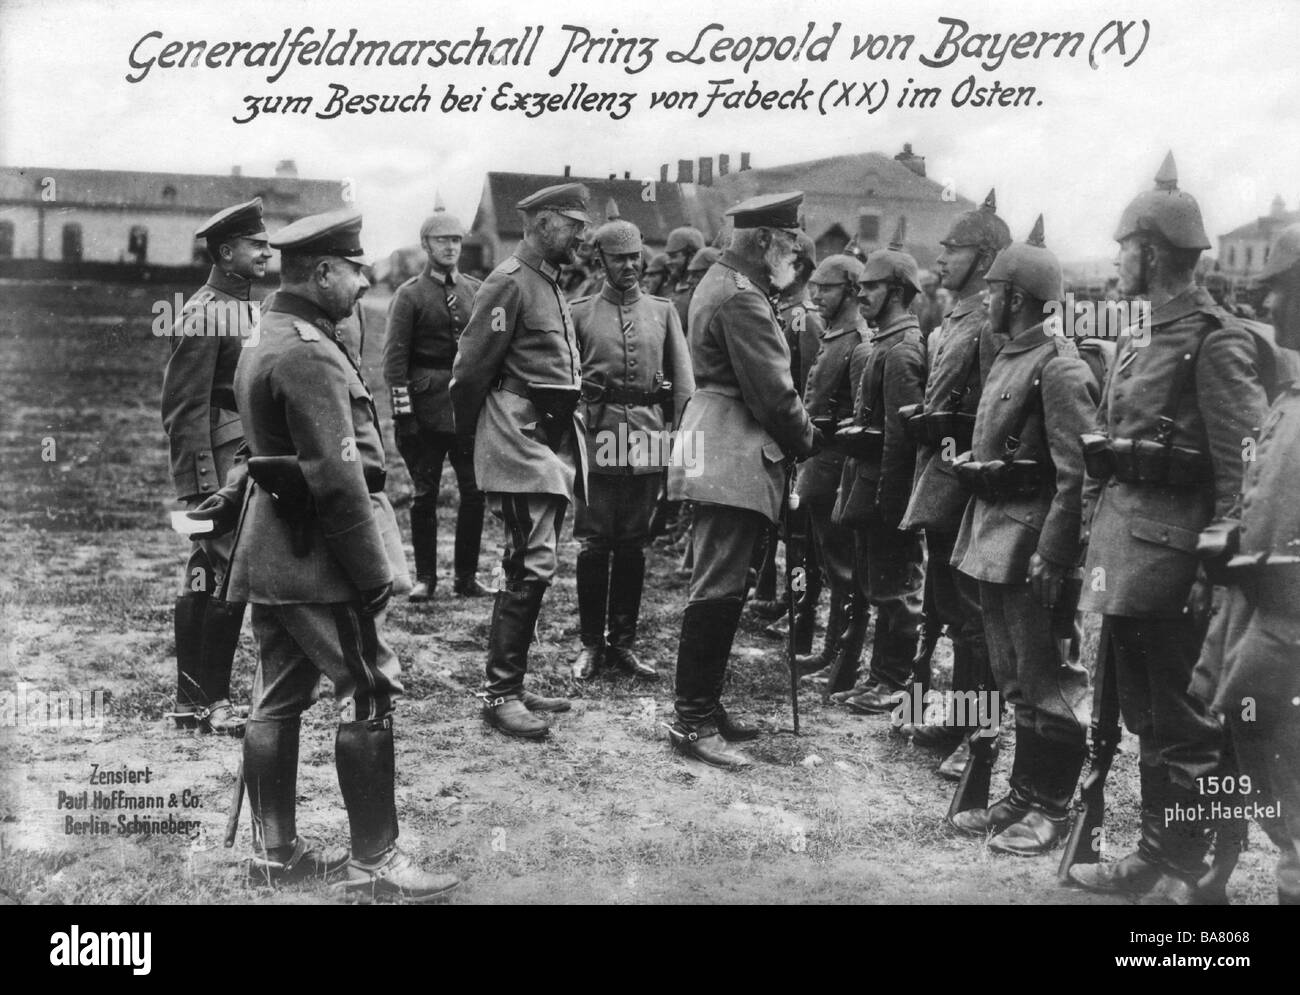 Leopold, 9.2.1846 - 28.9.1930, Prince of Bavaria, German general, Supreme Commander Eastern Front 29.8.1916 - 11.1.1919, visiting the troops, Poland, 1916, General Max von Fabeck behind him, , Stock Photo